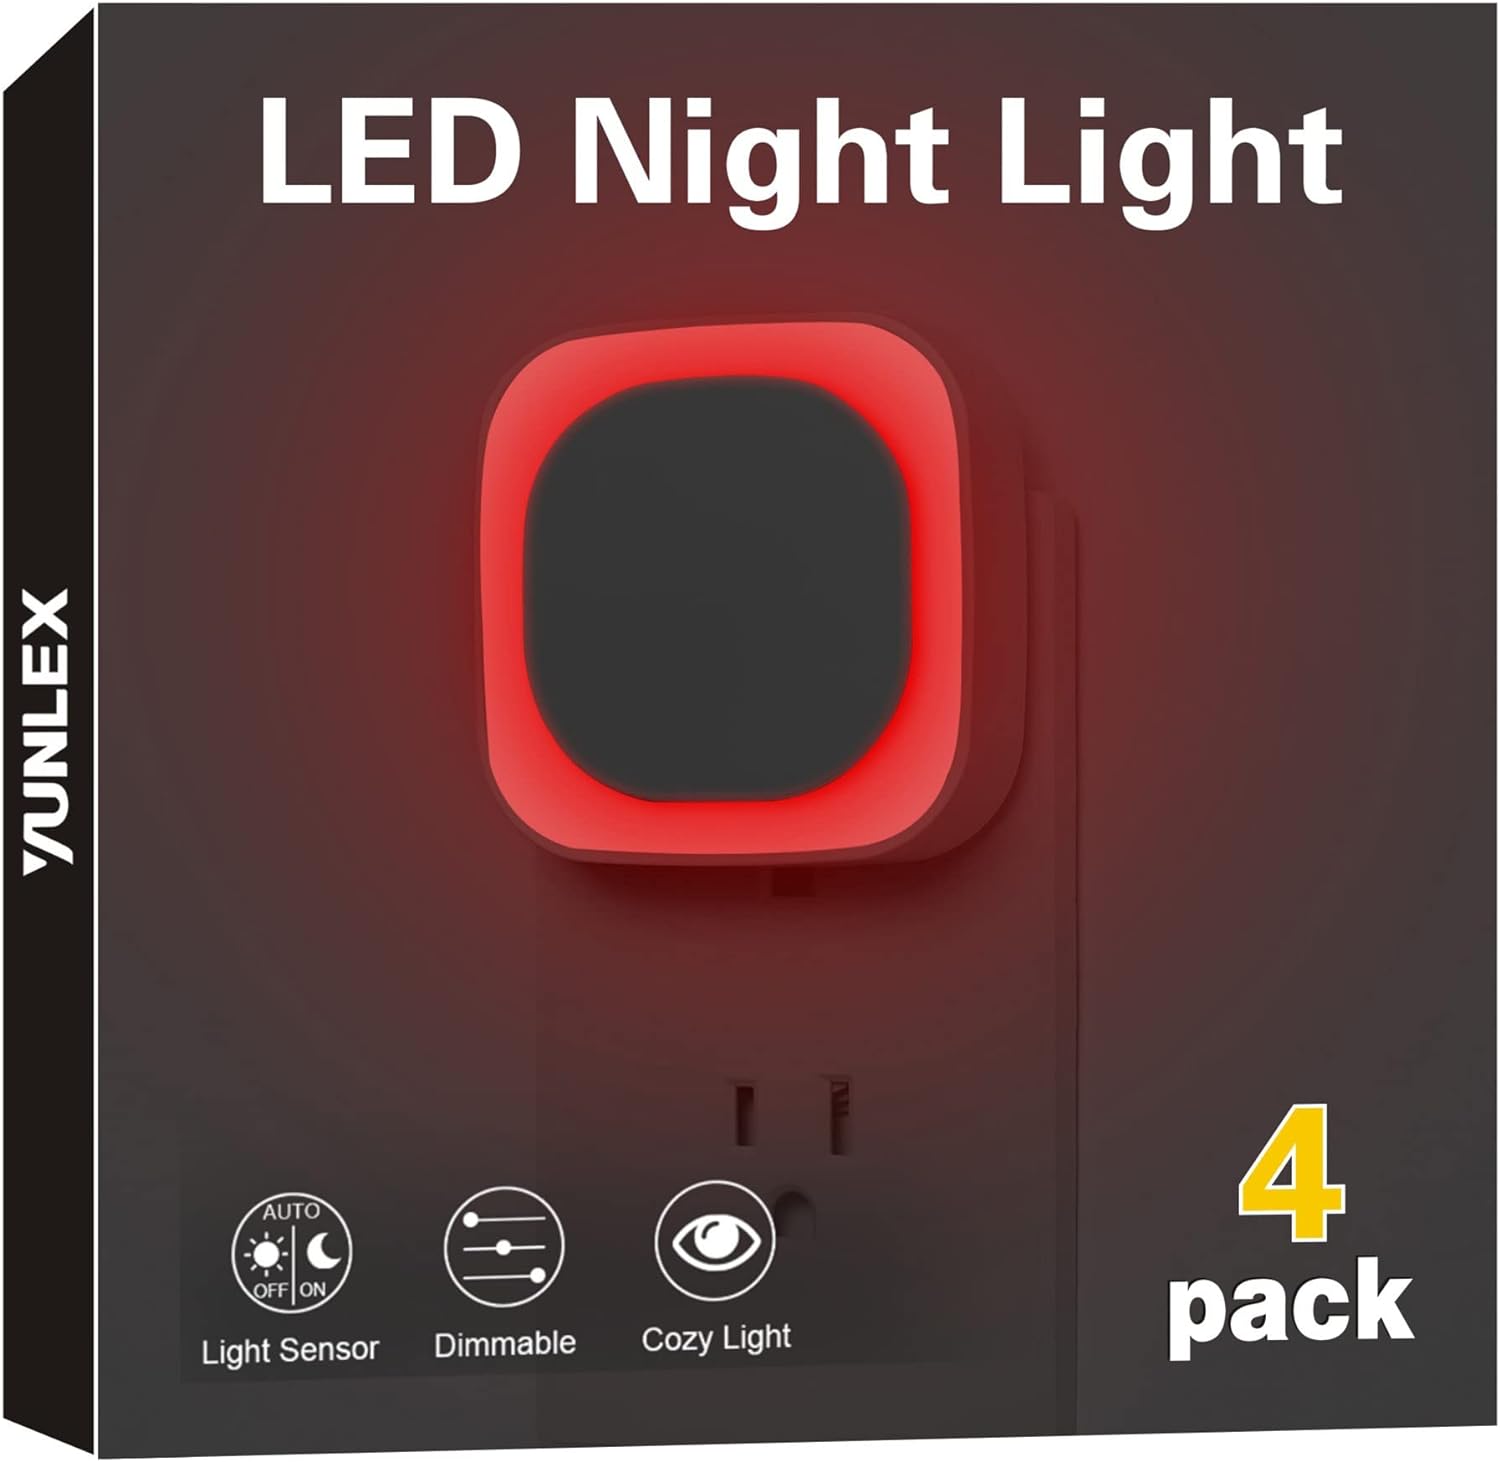 Works as advertised. Allows me to move aorund the house at night without fumbling for light switches. Nice soft red glow that protects night vision and doesn't interfere with sleep (like all those annoying devices with blue LEDs).